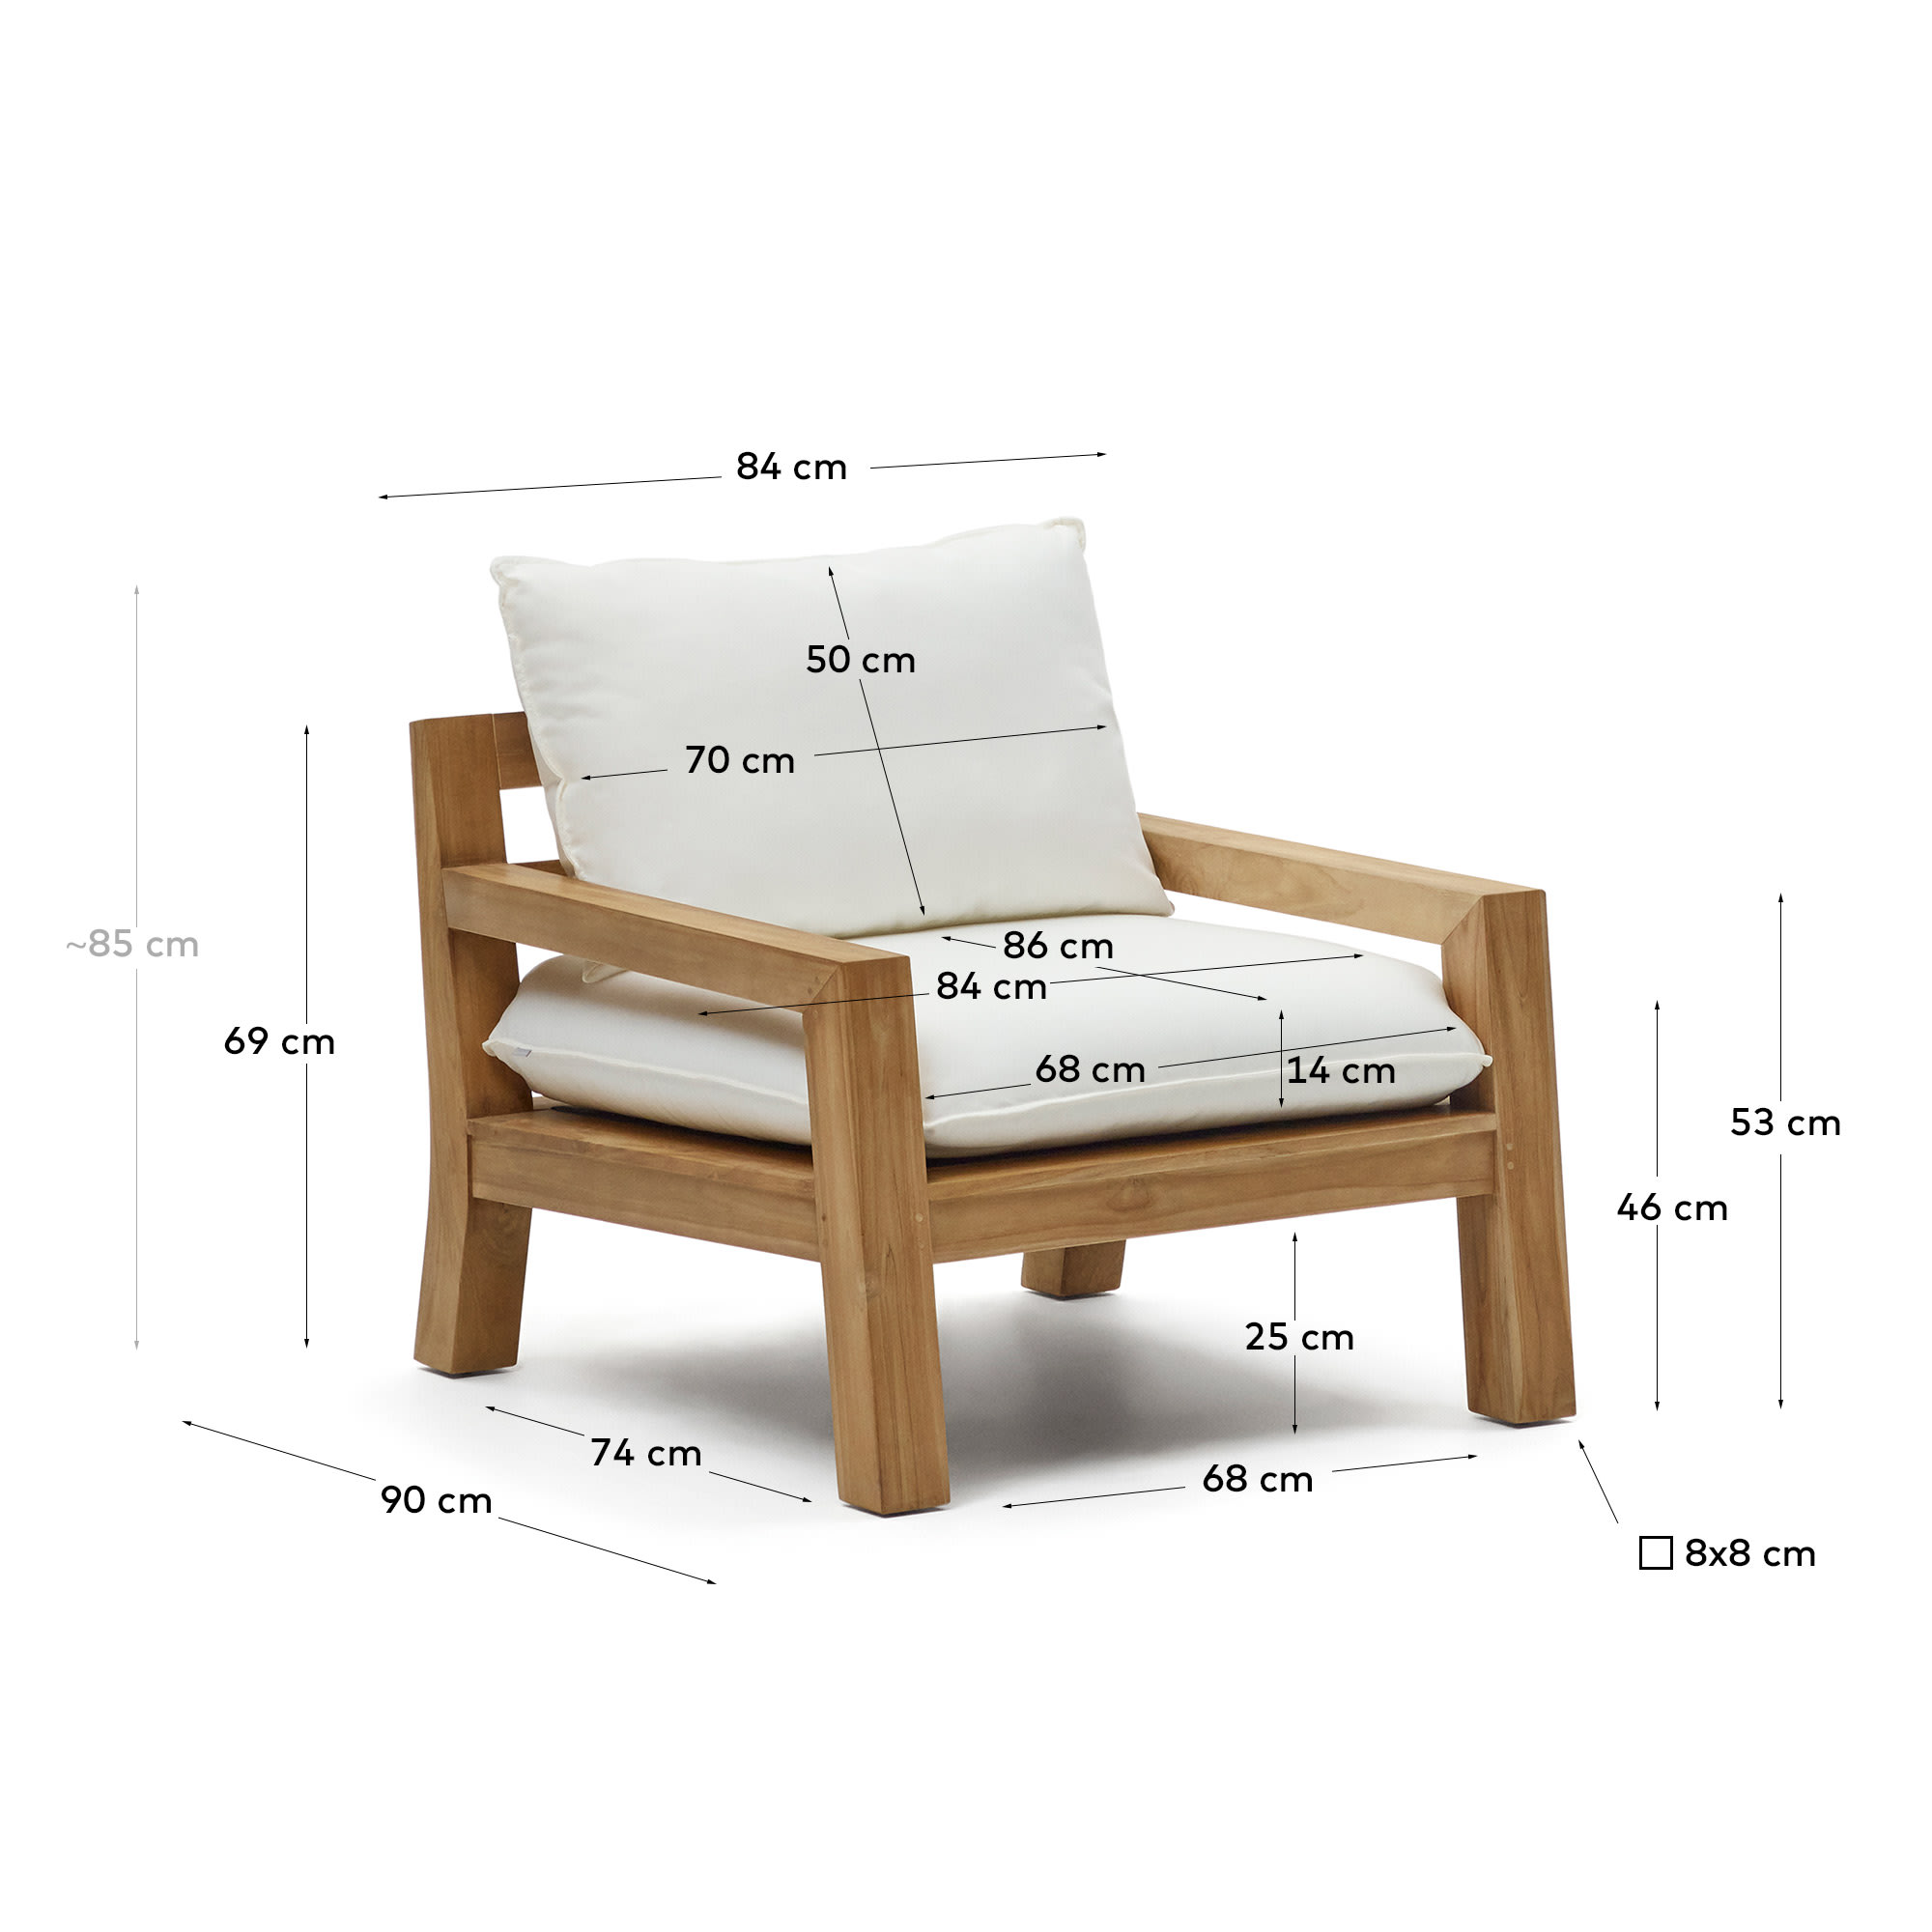 Forcanera solid teak chair - sizes